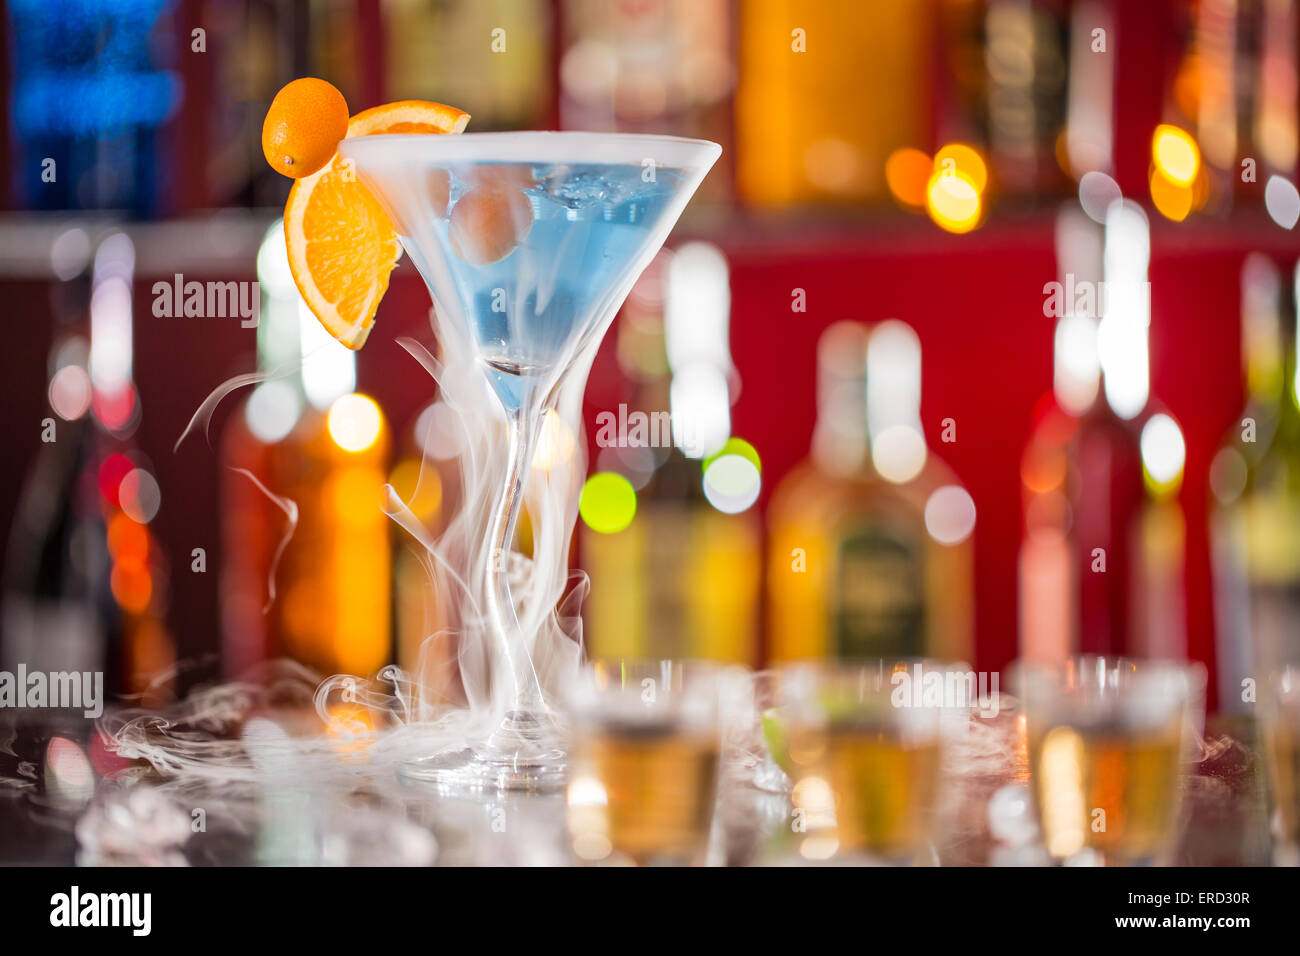 A Lot Of Martini Glasses Stand On The Bar Red Syrup Blue Rim On The Glasses  Stock Photo - Download Image Now - iStock